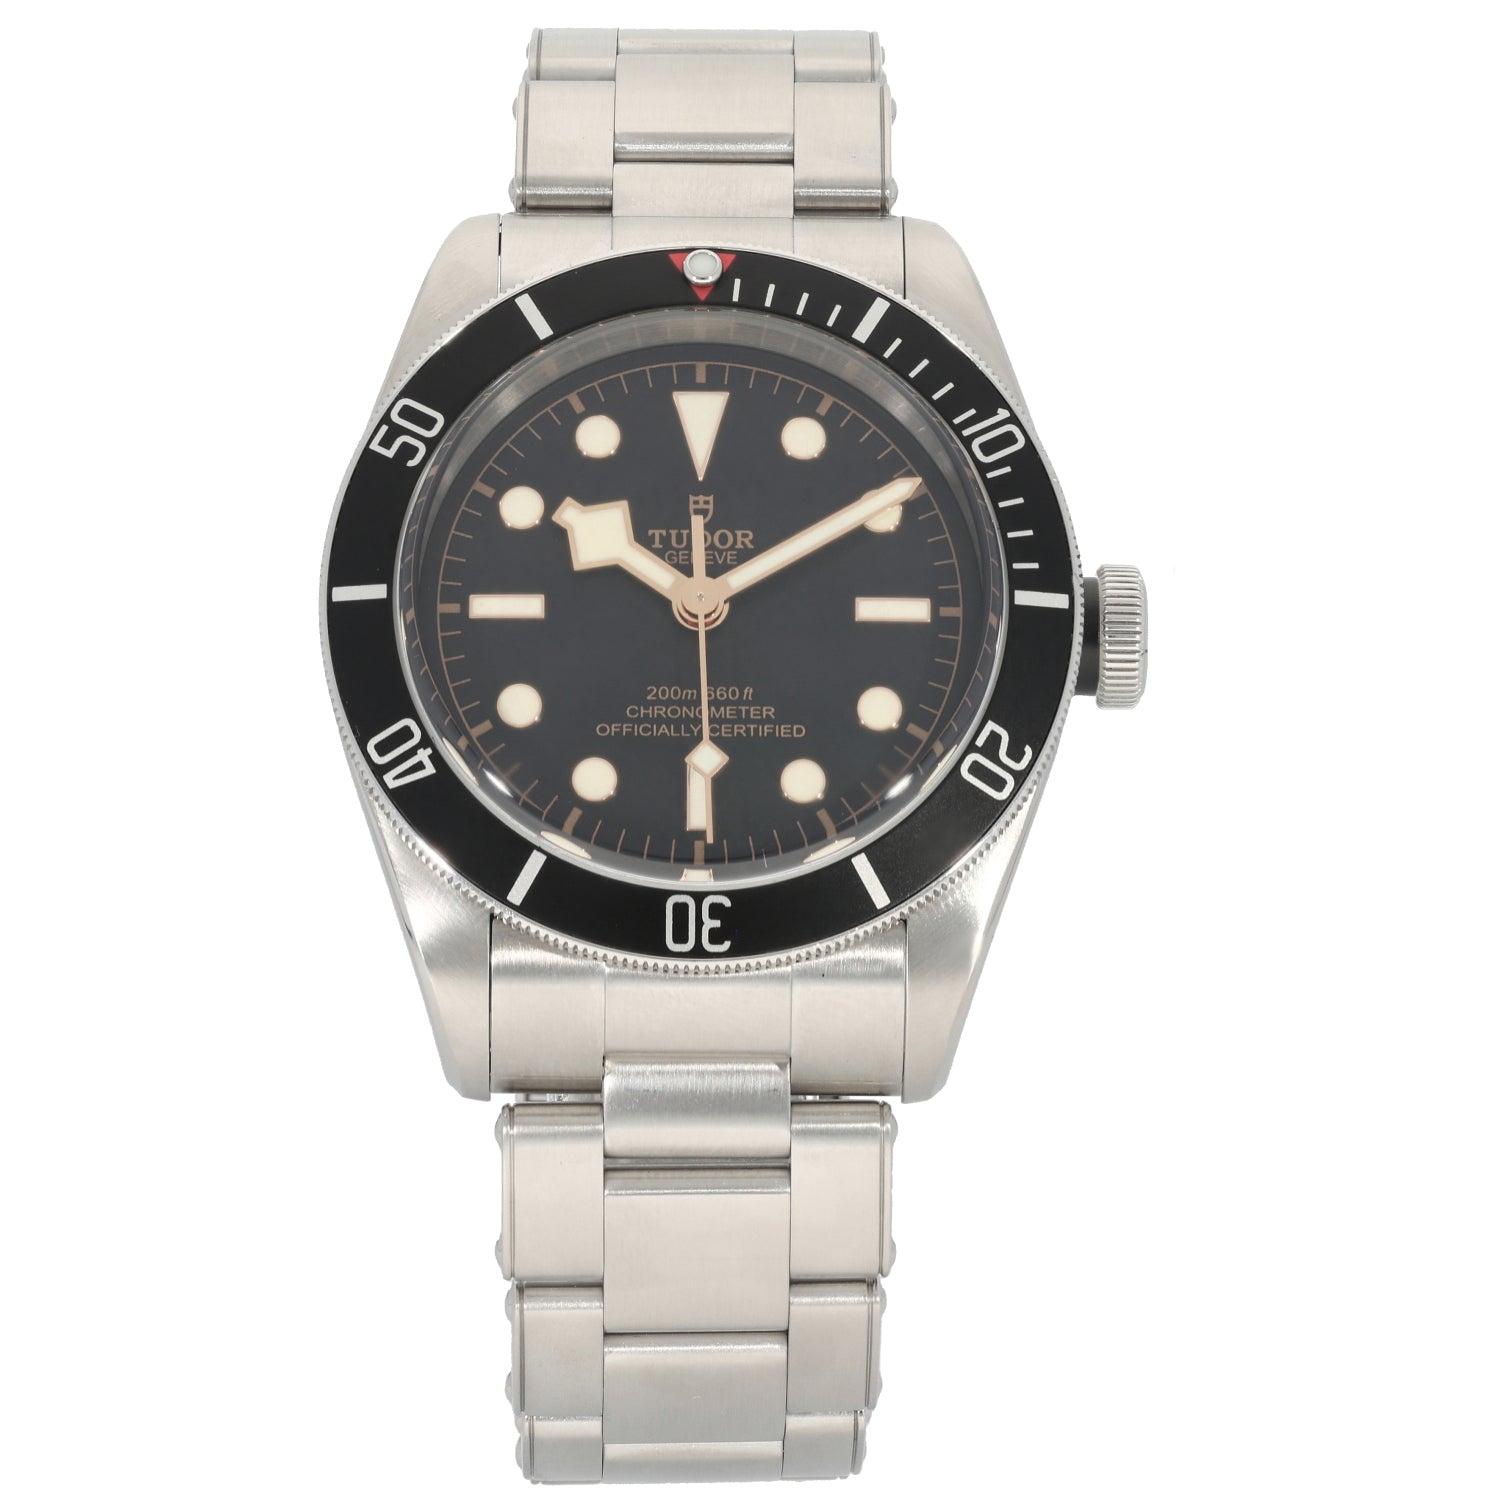 Tudor Black Bay 79230 41mm Stainless Steel Watch – H&T